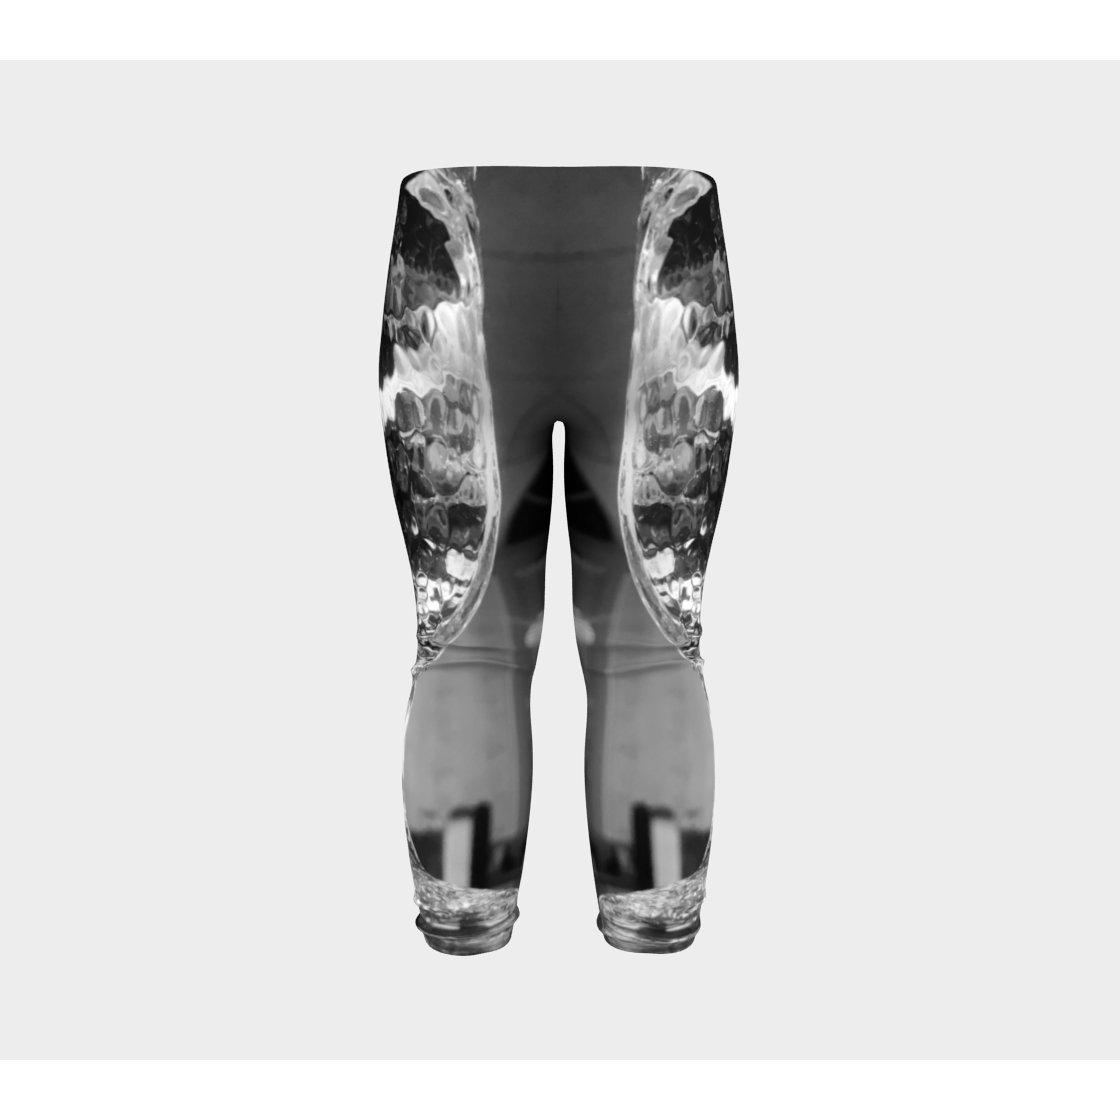 Baby Leggings for Children with: Water Glass, 2 year back